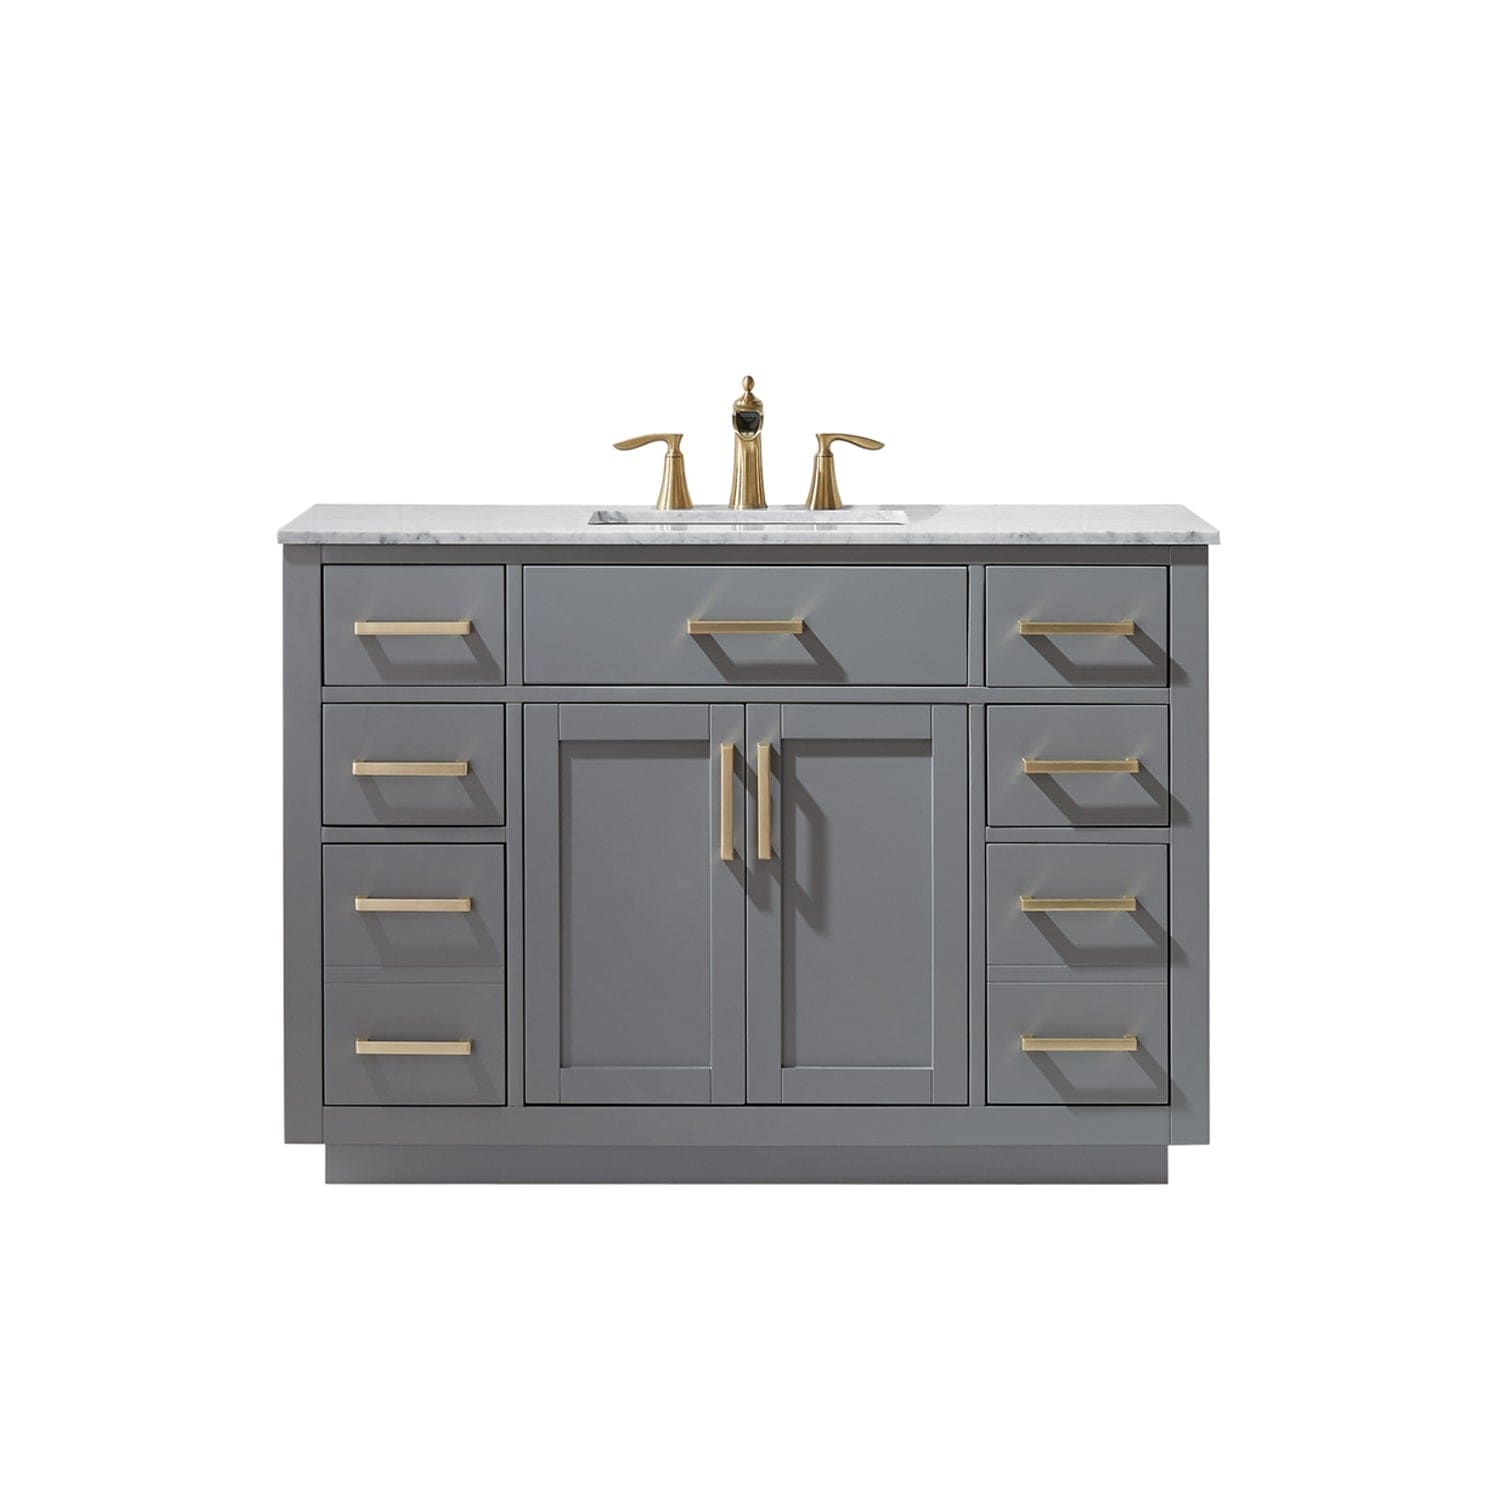 Altair Ivy 48" Single Bathroom Vanity Set in Gray and Carrara White Marble Countertop without Mirror 531048-GR-CA-NM - Molaix631112971164Vanity531048-GR-CA-NM